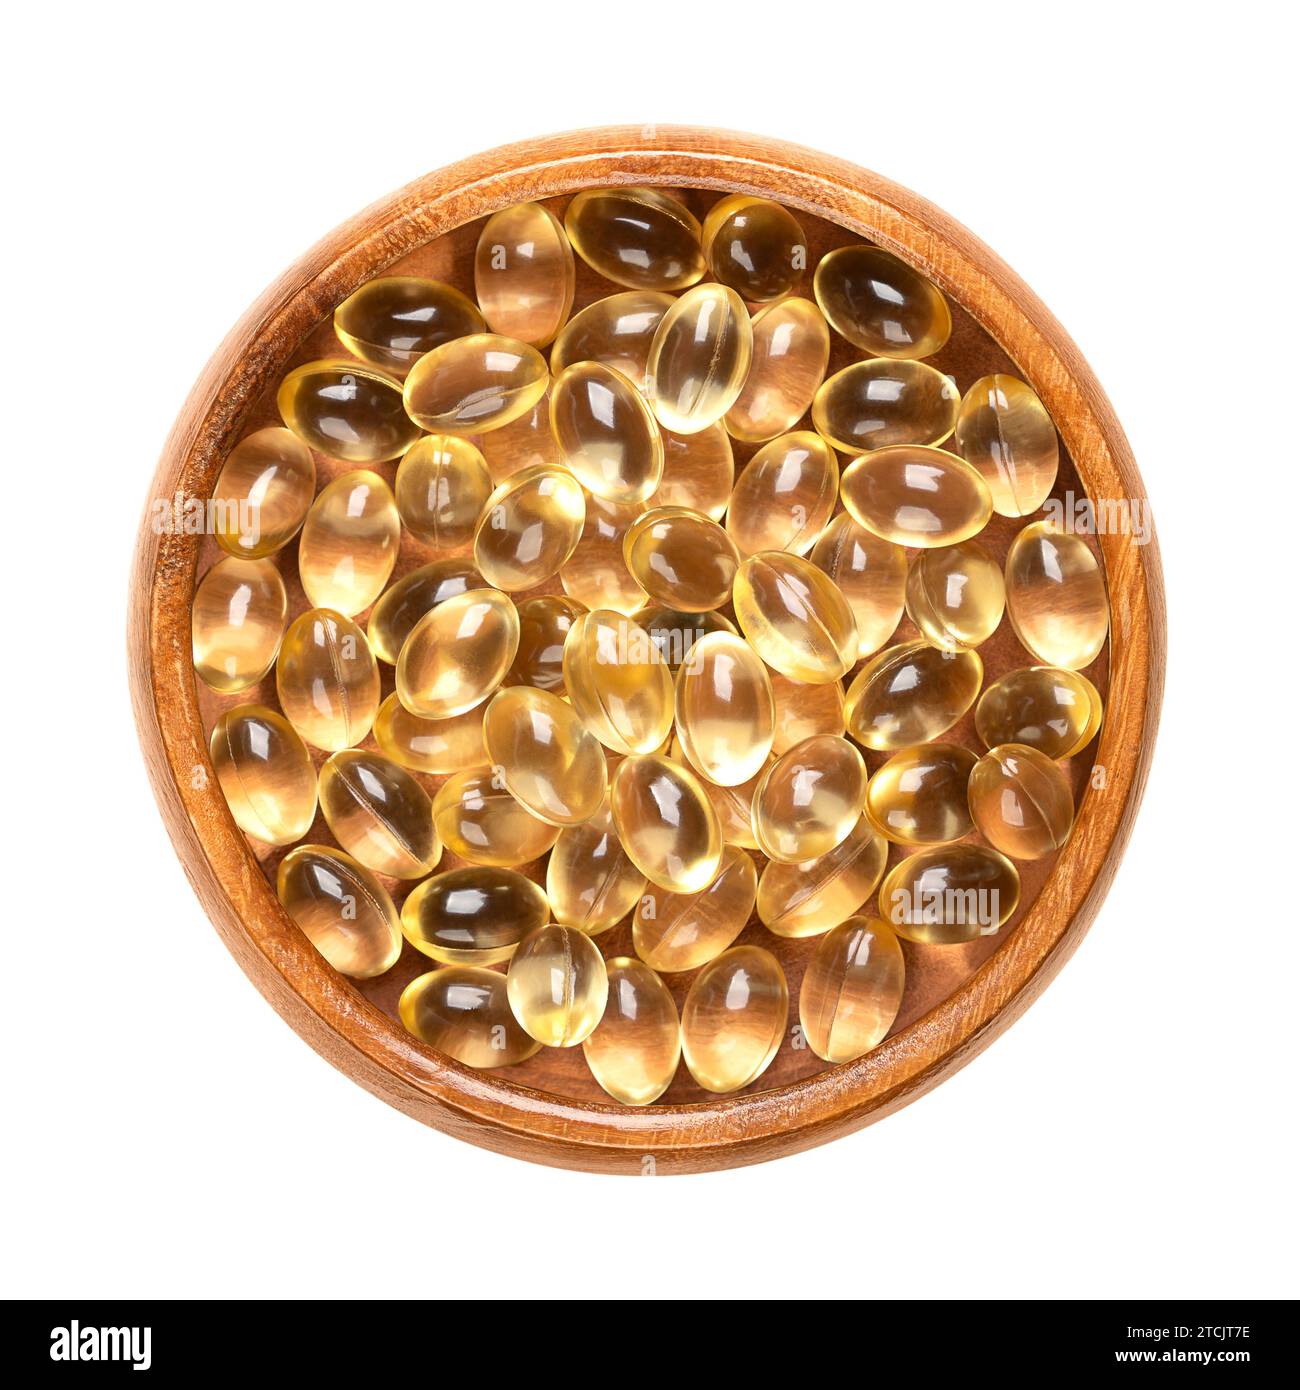 Soft gel capsules in a wooden bowl. Oral dosage medicine or dietary supplement in the form of a transparent capsule. Stock Photo